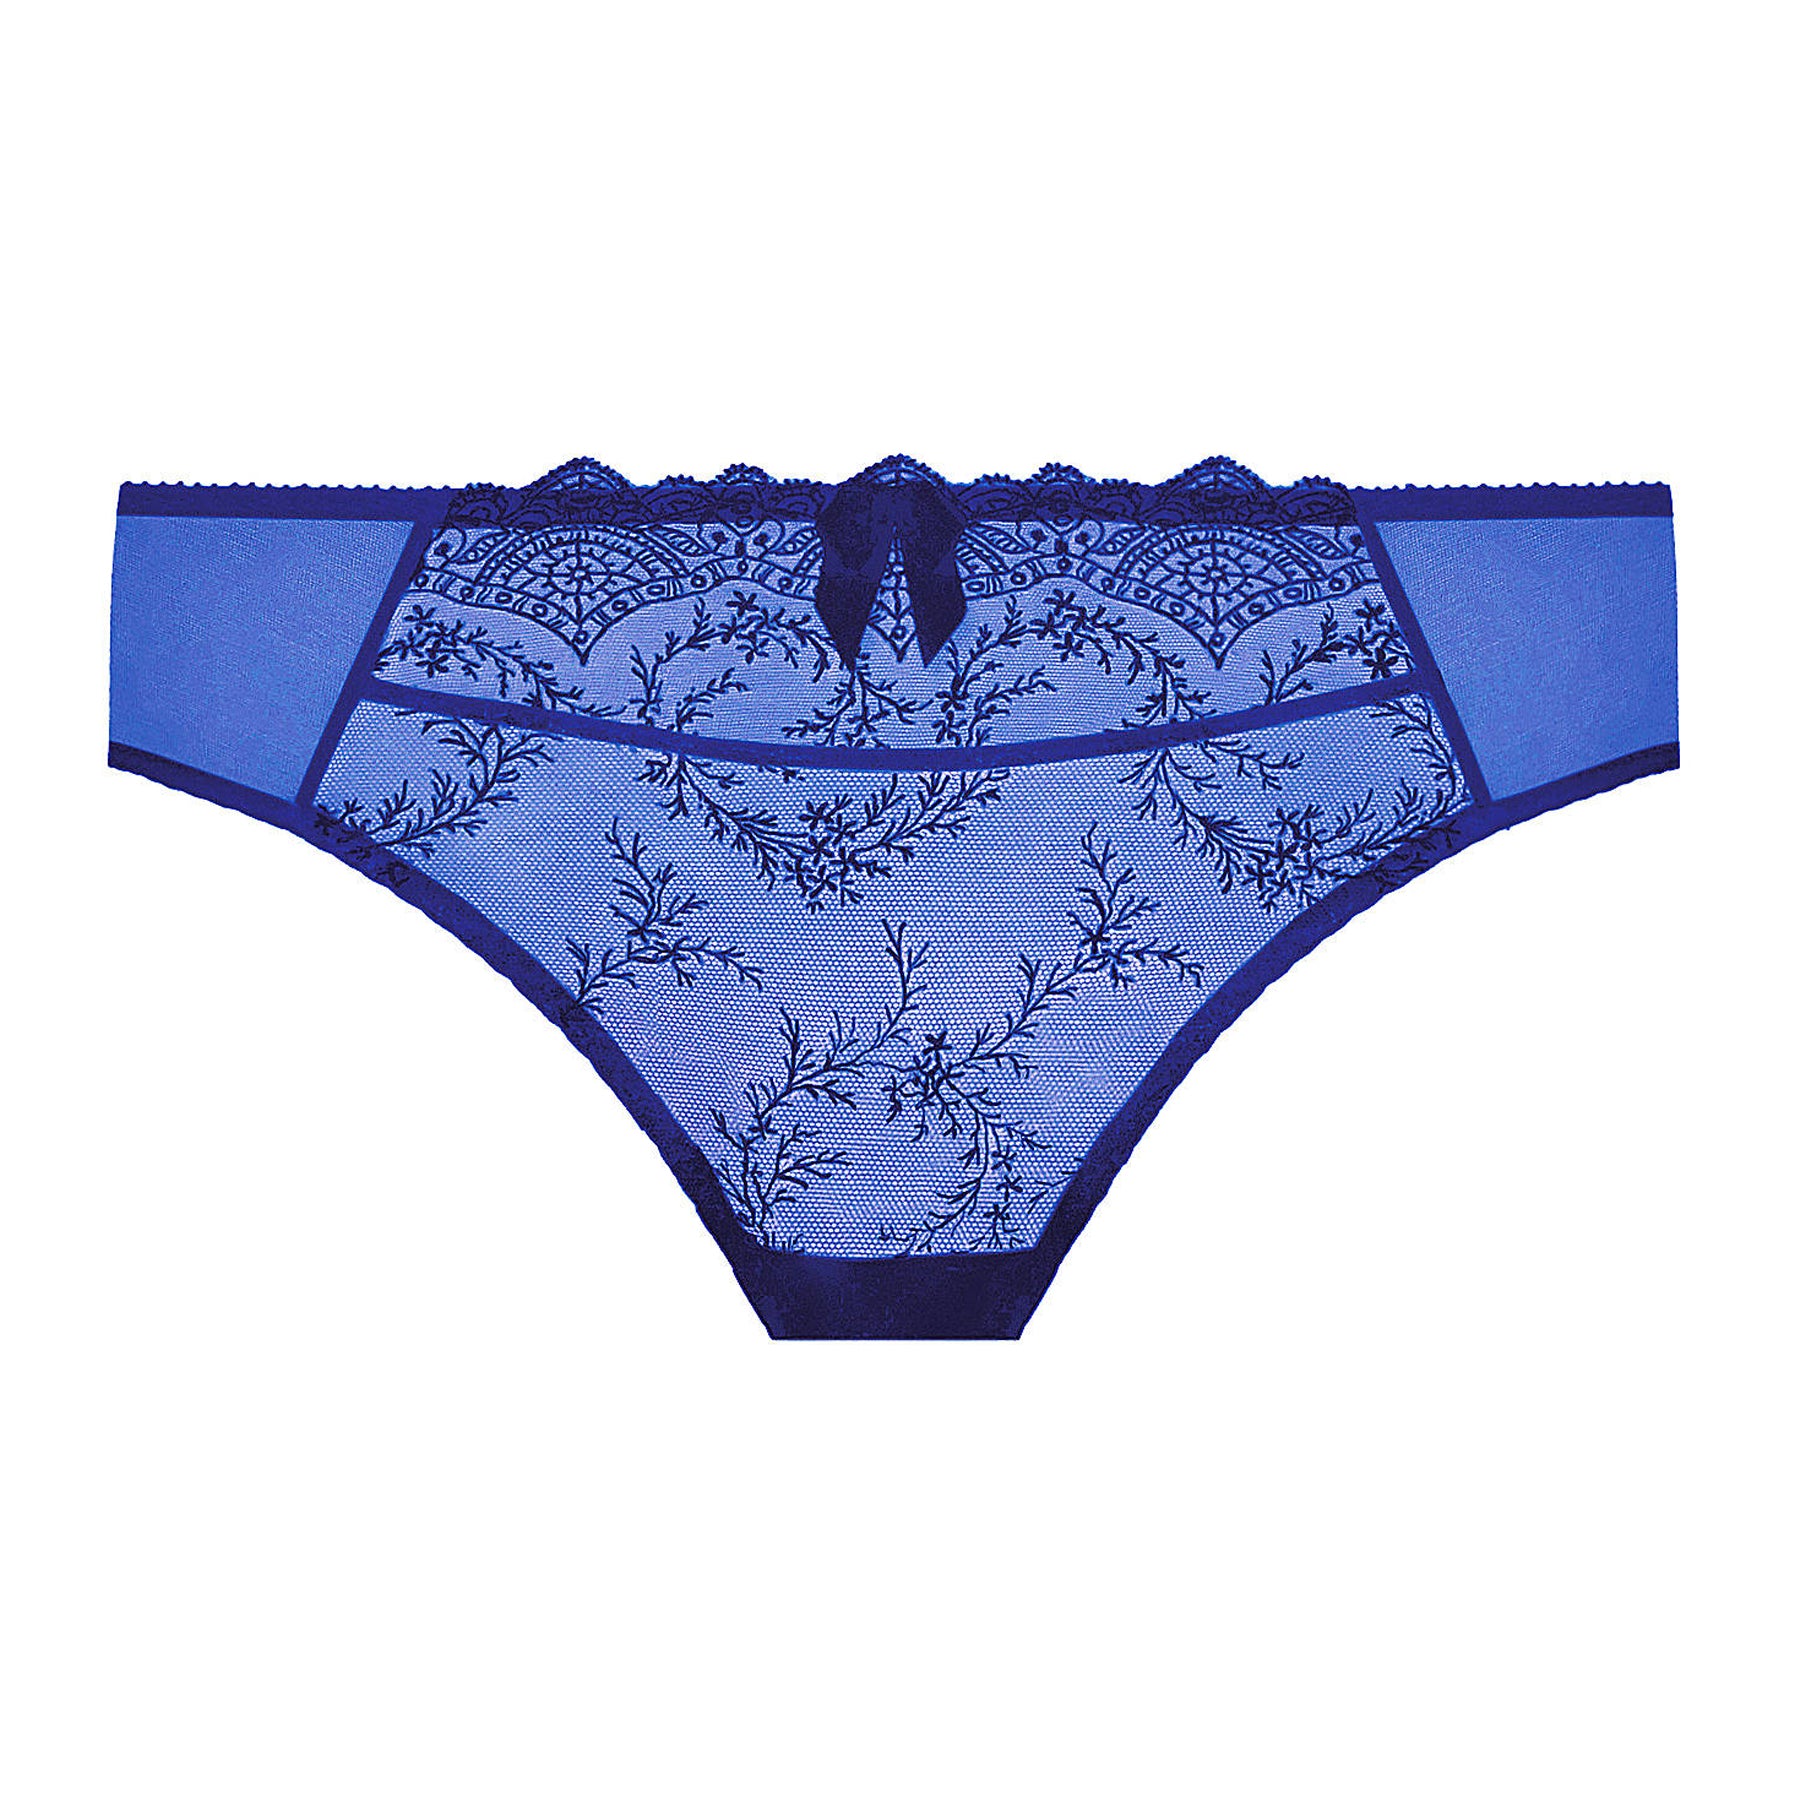 The PERFECT navy colorway - Ashley's Lingerie & Swimwear